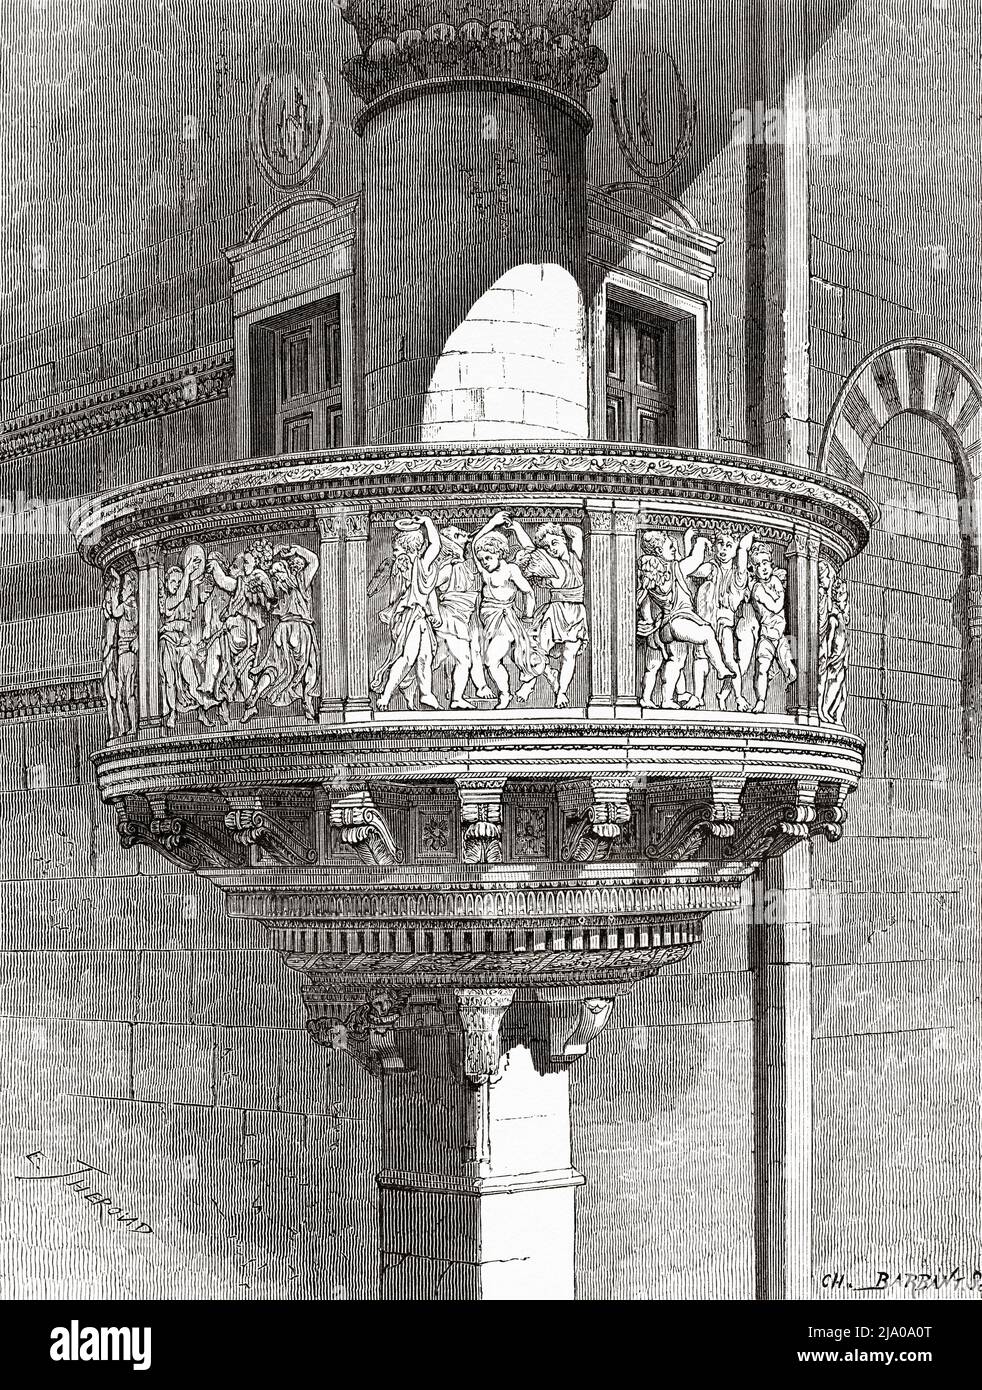 Pulpit sculptural work by Donatello and Michelozzo. Cathedral of Saint Stephen in Prato, Tuscany, Central Italy. Europe. Small Towns and Great Art in Tuscany by Henri Belle 1871. Le Tour du Monde 1879 Stock Photo